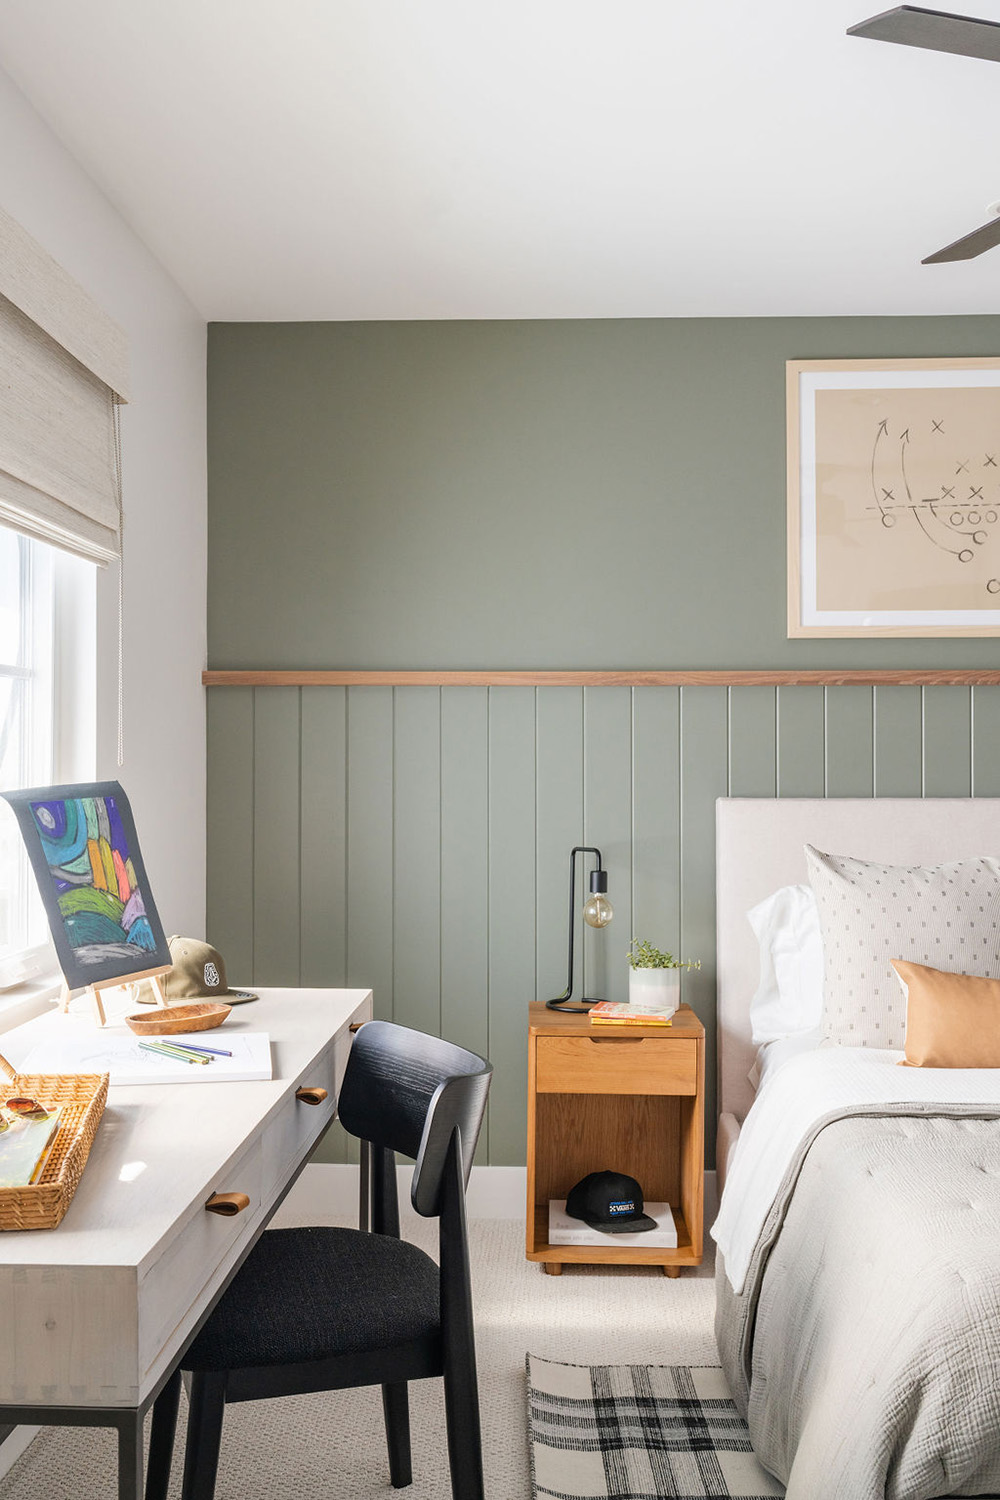 Bedroom design with green accent all and comfy details